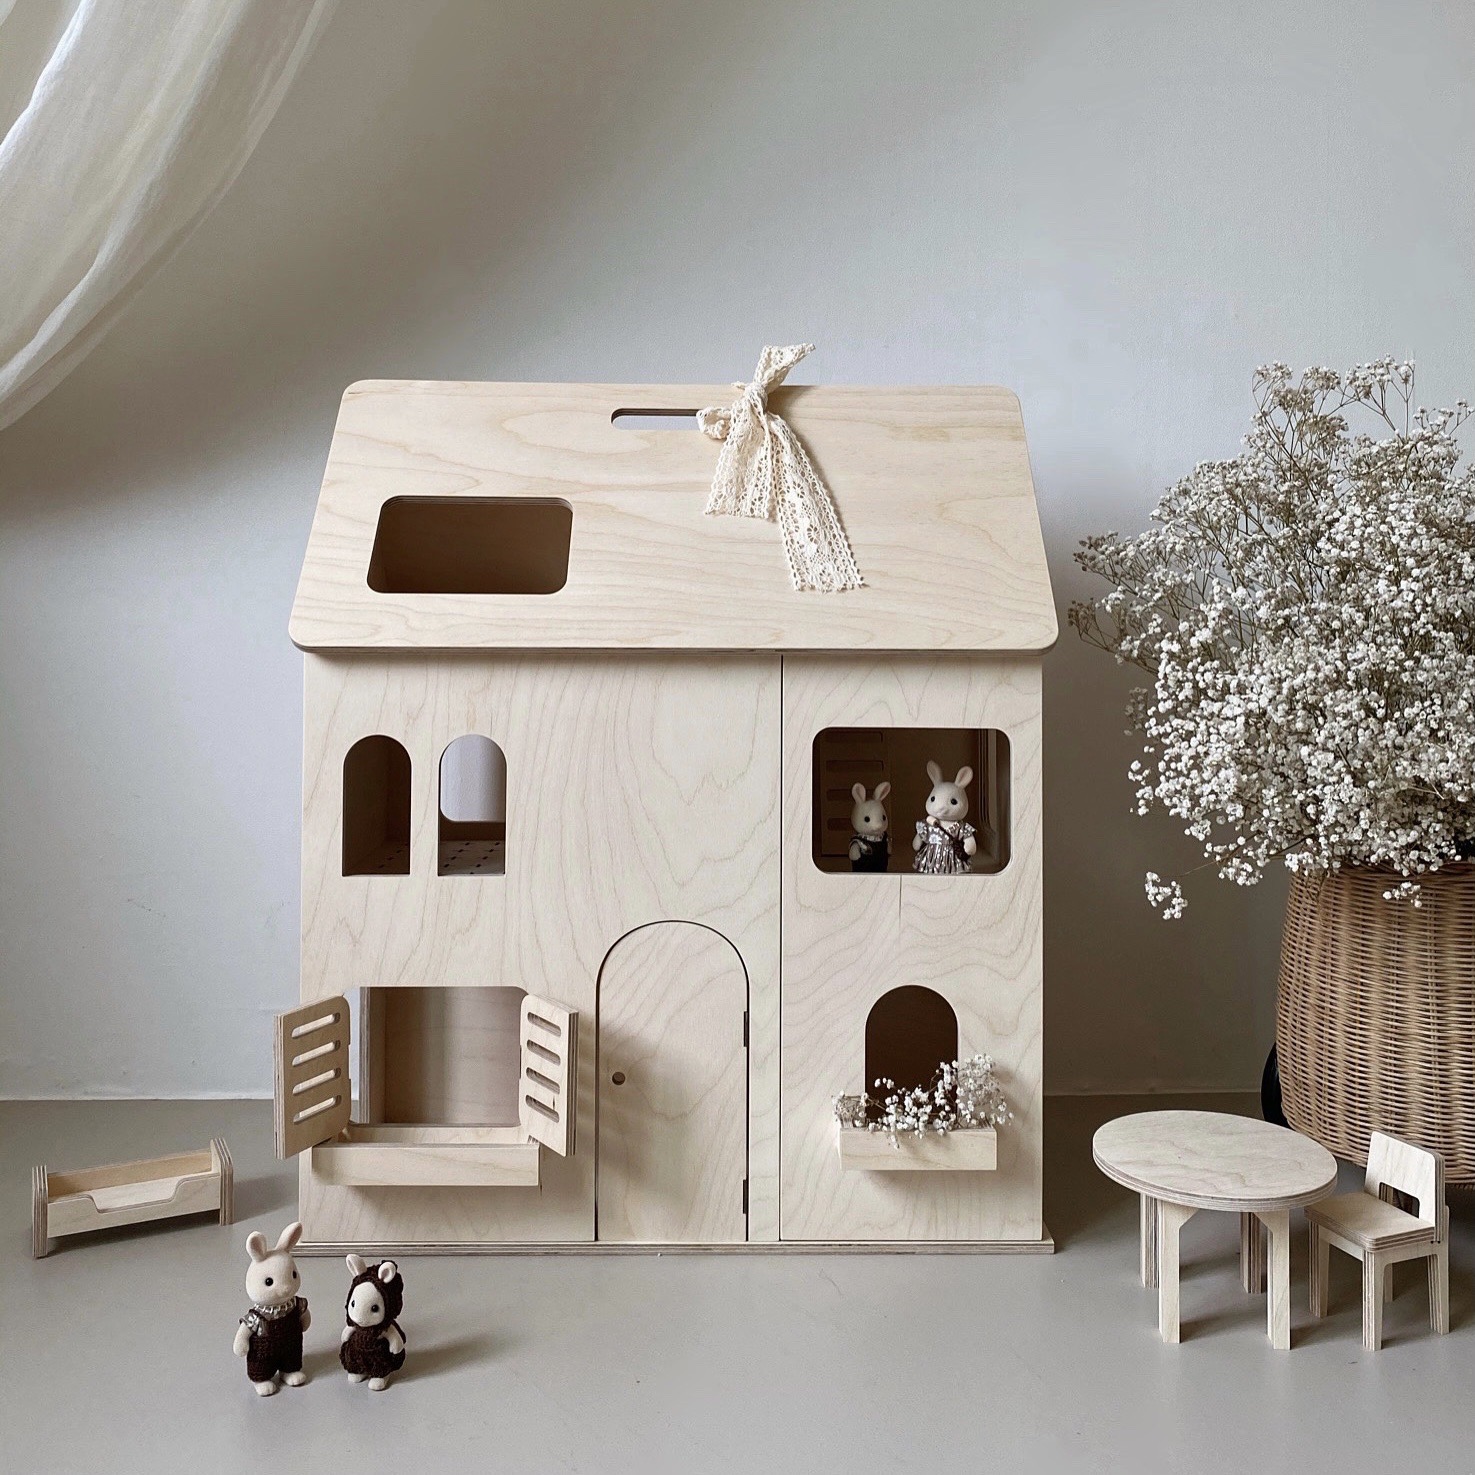 new doll’s house